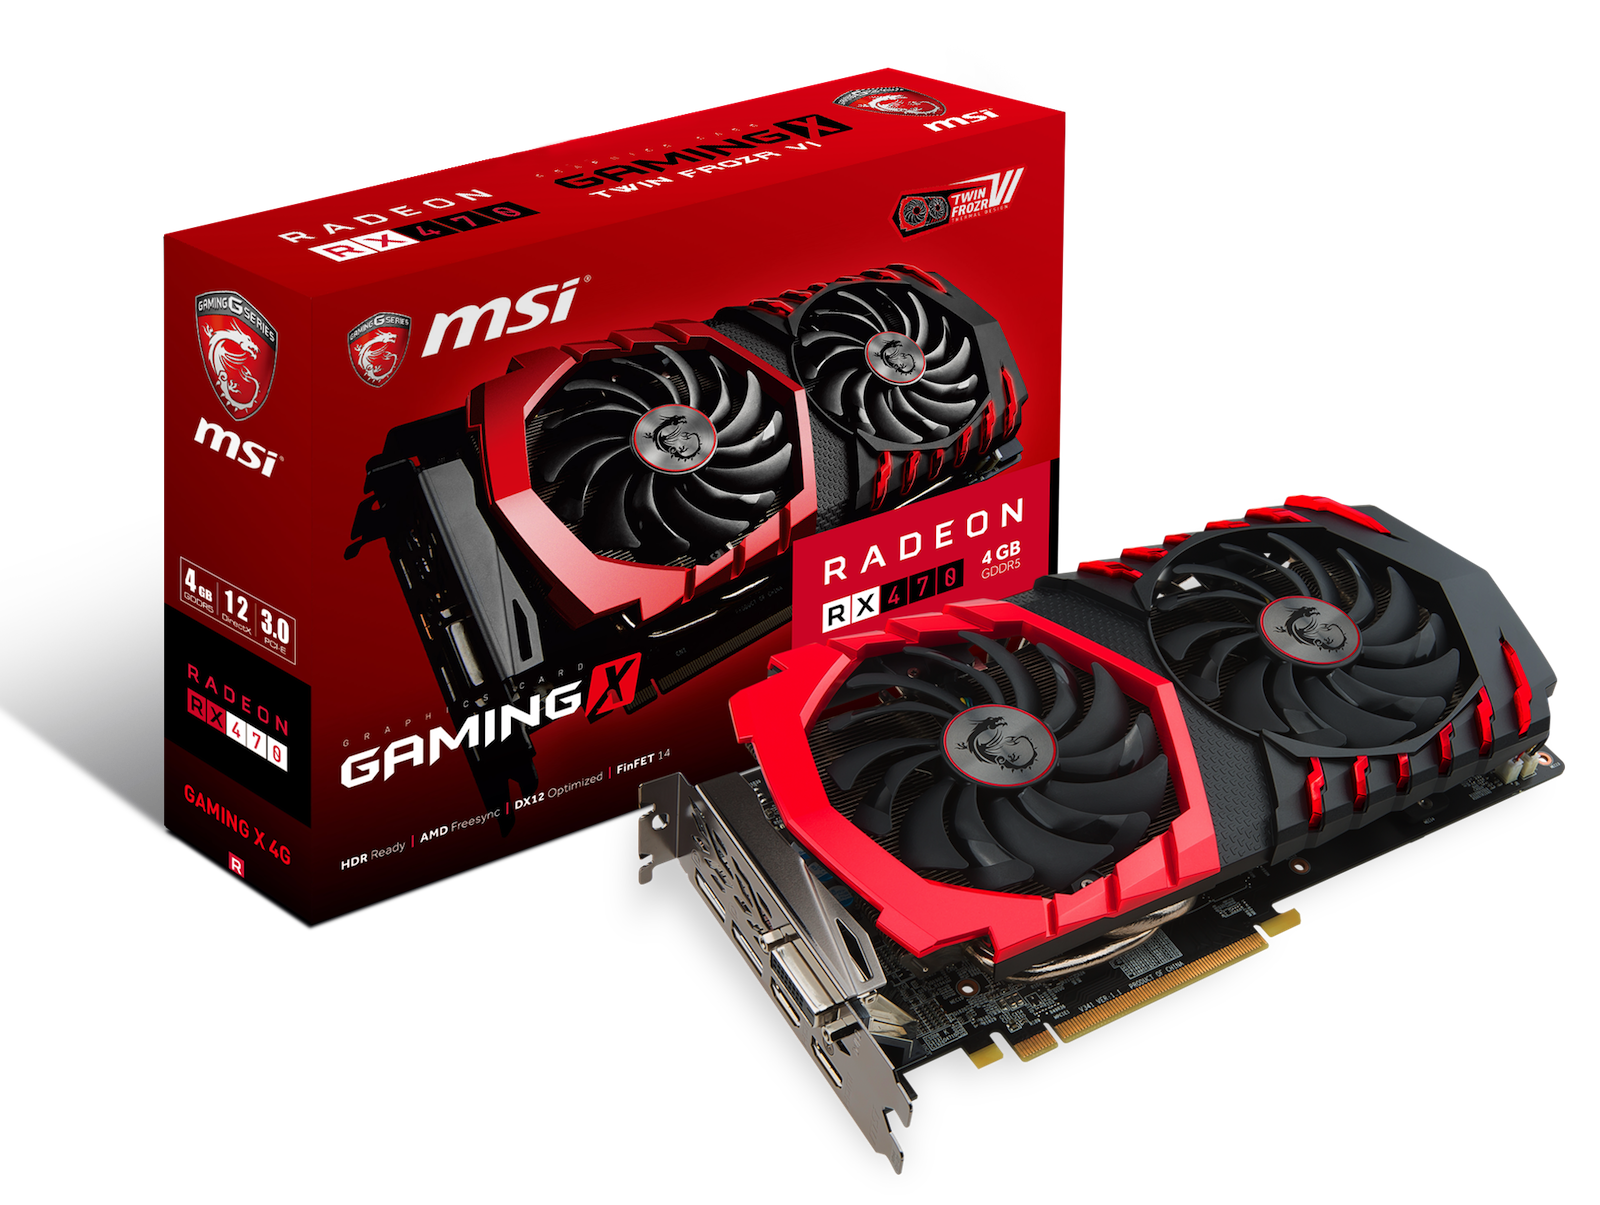 MSI Radeon RX 470 Gaming X 4 GB Review - NotebookCheck.net Reviews